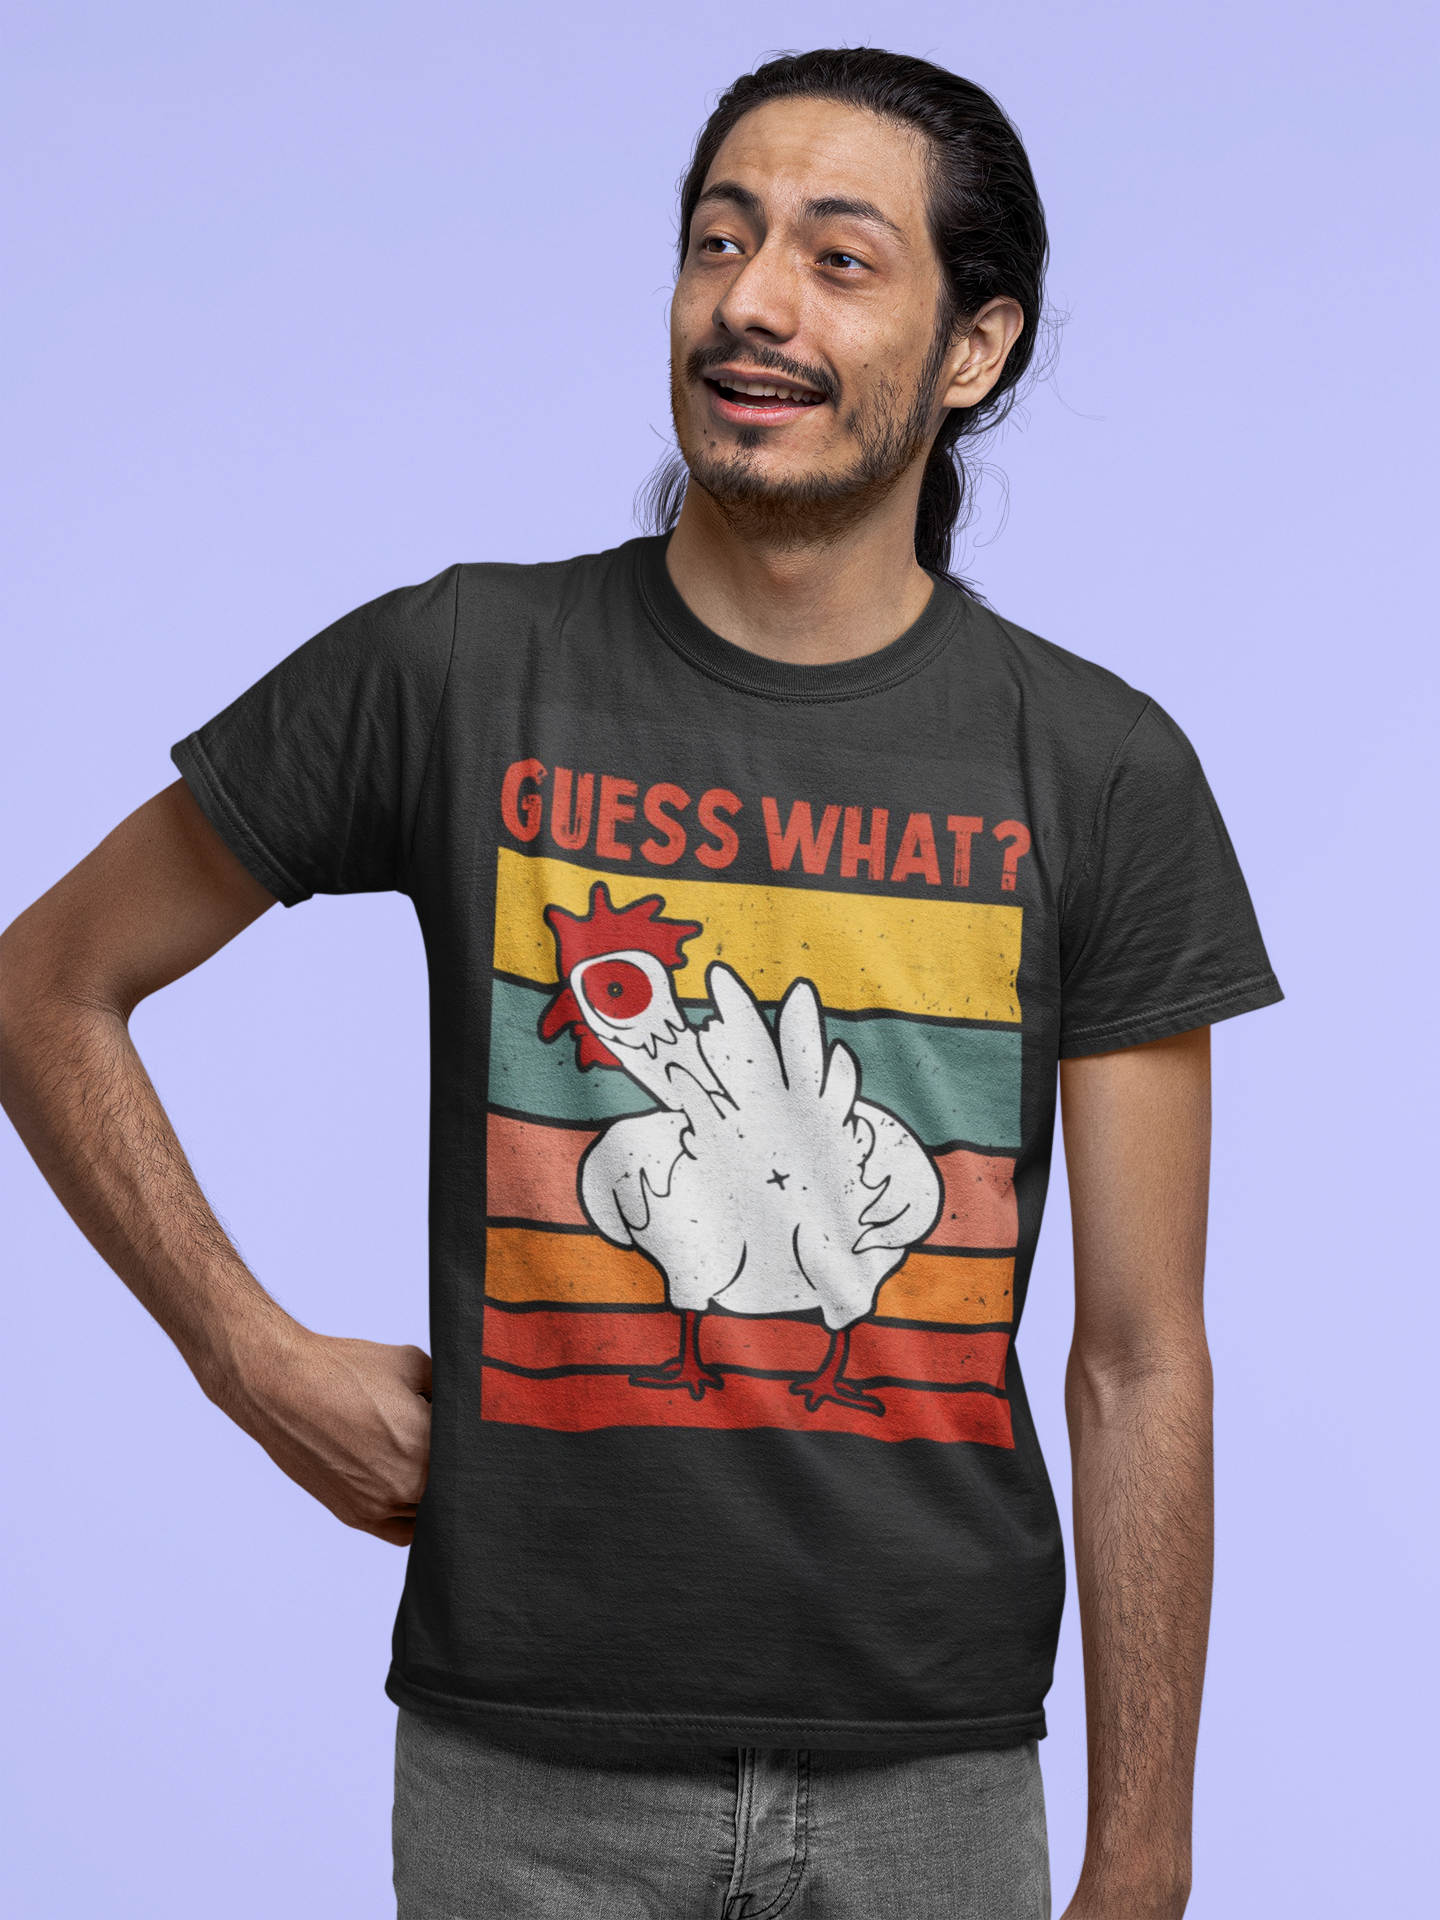 "Guess What? Chicken Butt." Unisex Ultra Cotton Tee - Classic Humor Meets Comfortable Style perfect way to lighten the mood at casual gatherings